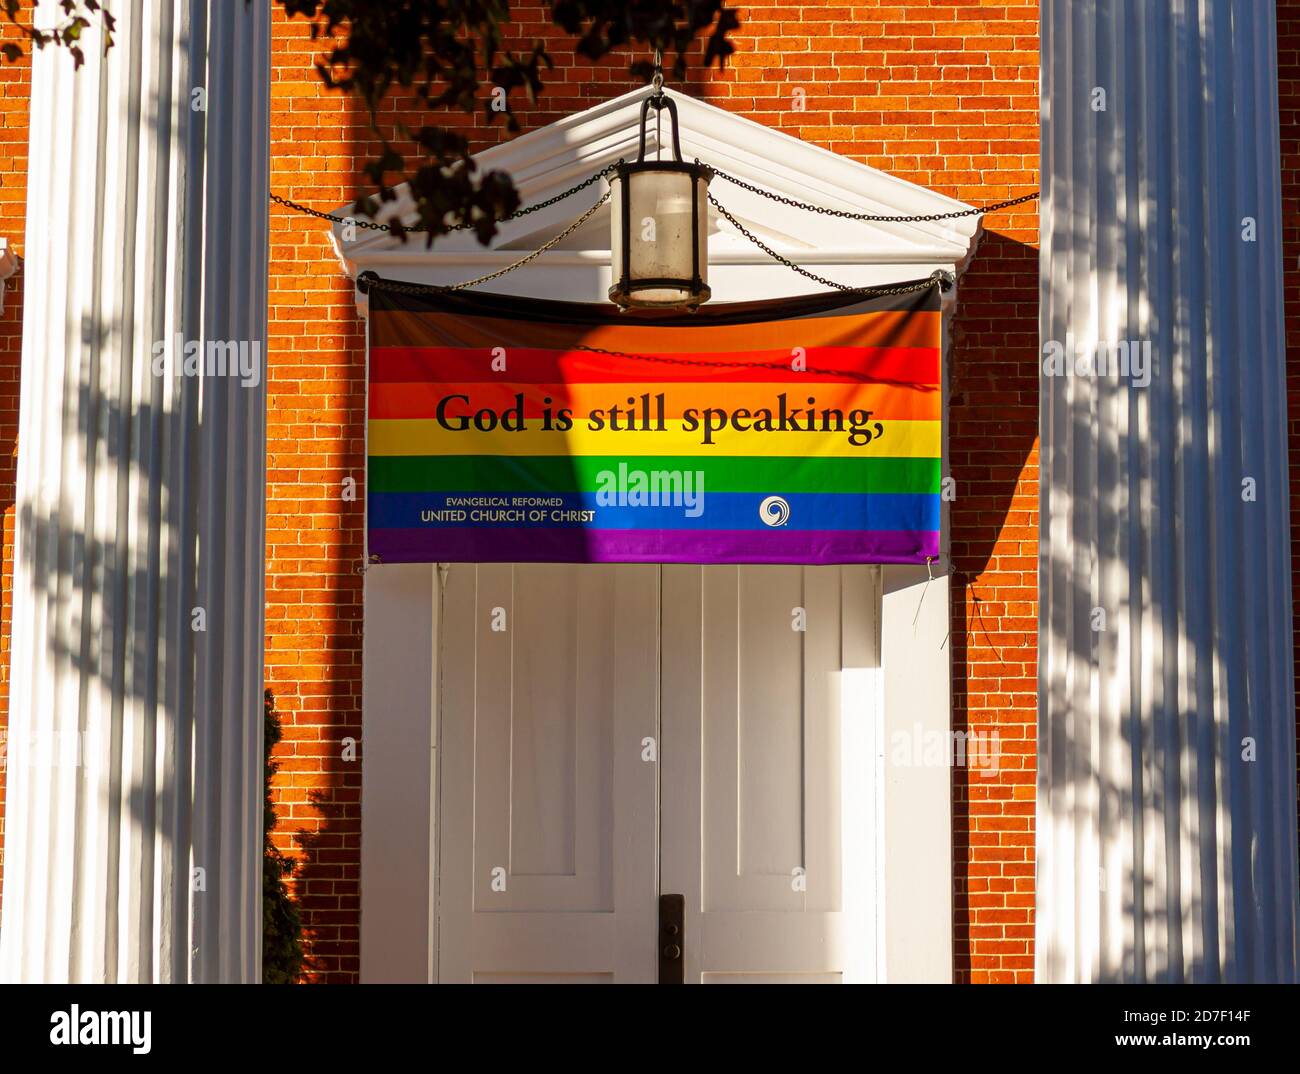 Frederick, MD, USA 10/13/2020: Close up image of the front door of the Evangelical Reformed United Church of Christ with a large LGBT flag that says G Stock Photo